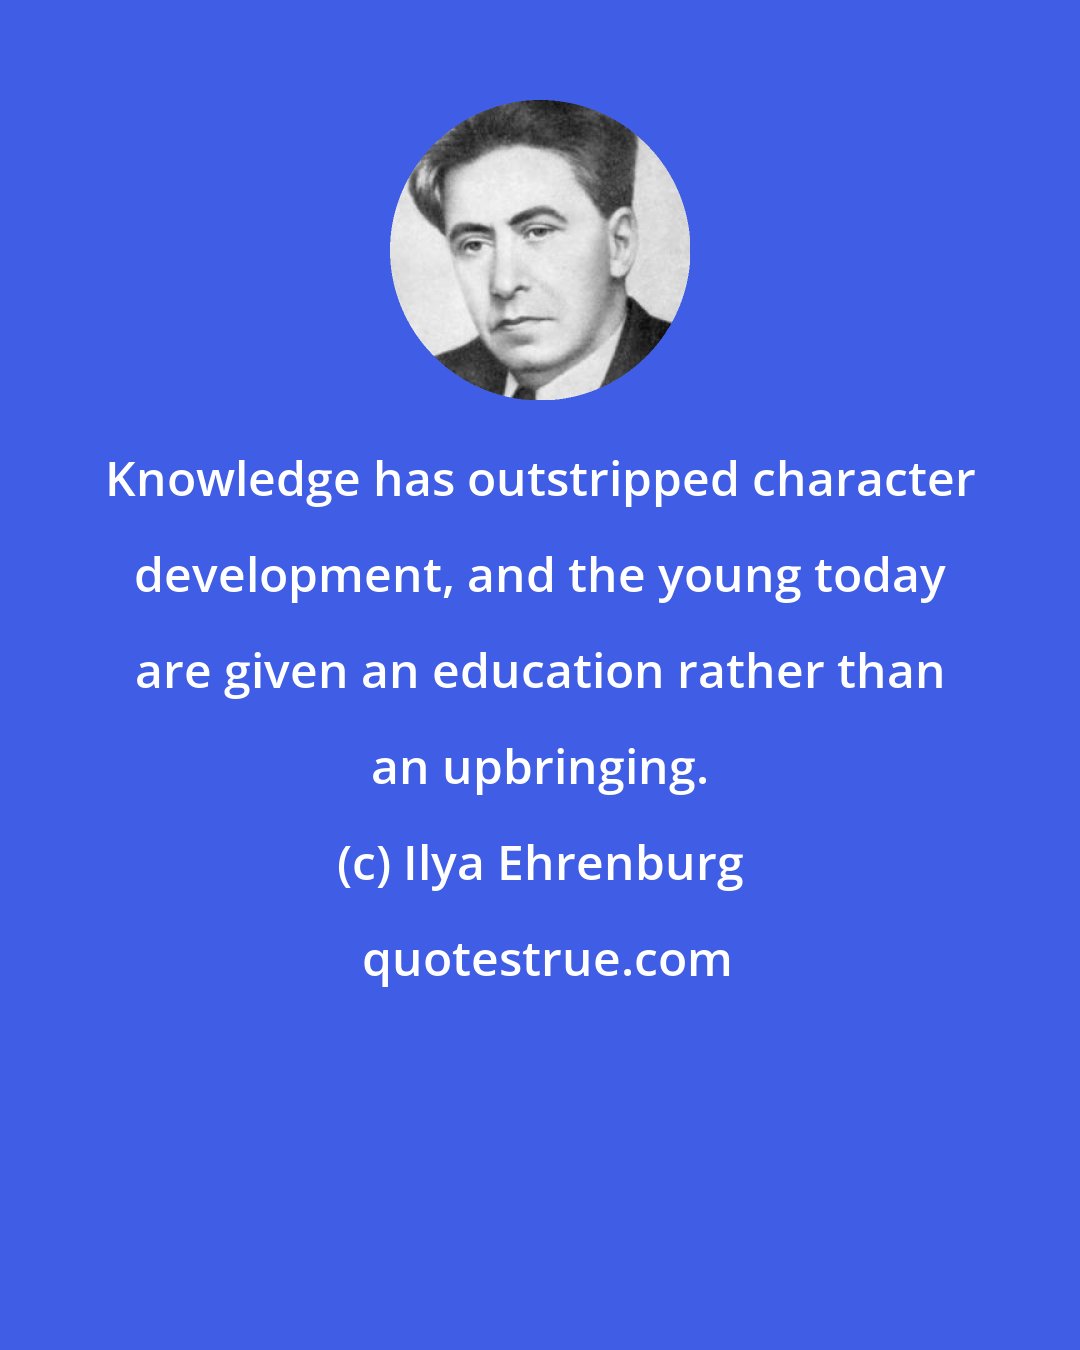 Ilya Ehrenburg: Knowledge has outstripped character development, and the young today are given an education rather than an upbringing.